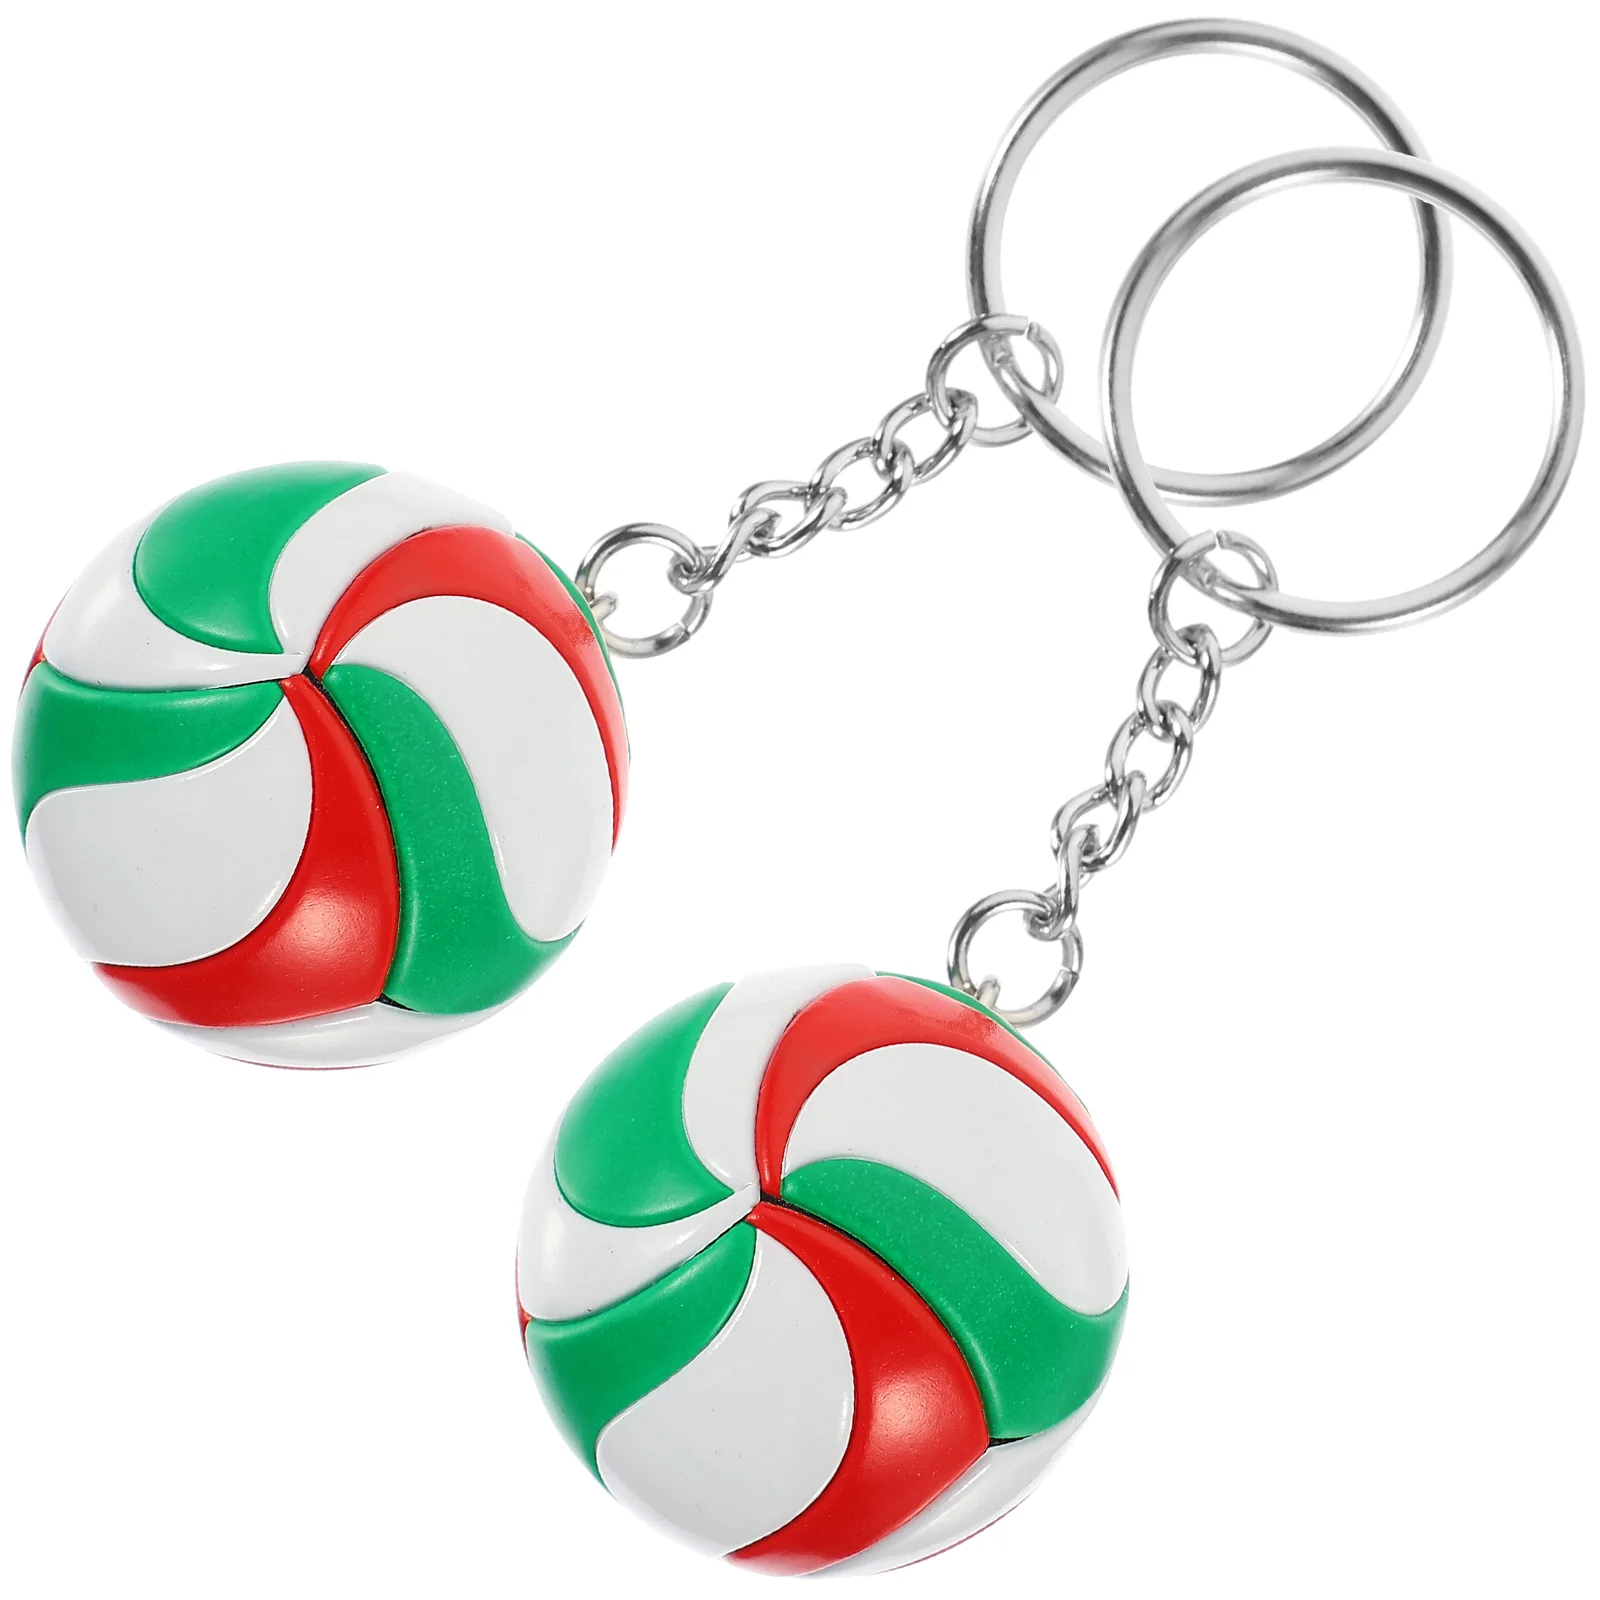 

2 Pcs Volleyball Model Toy Meaningful Gifts Exquisite Keychain Home Portable Keychains Backpacks Bag Pendant Trendy